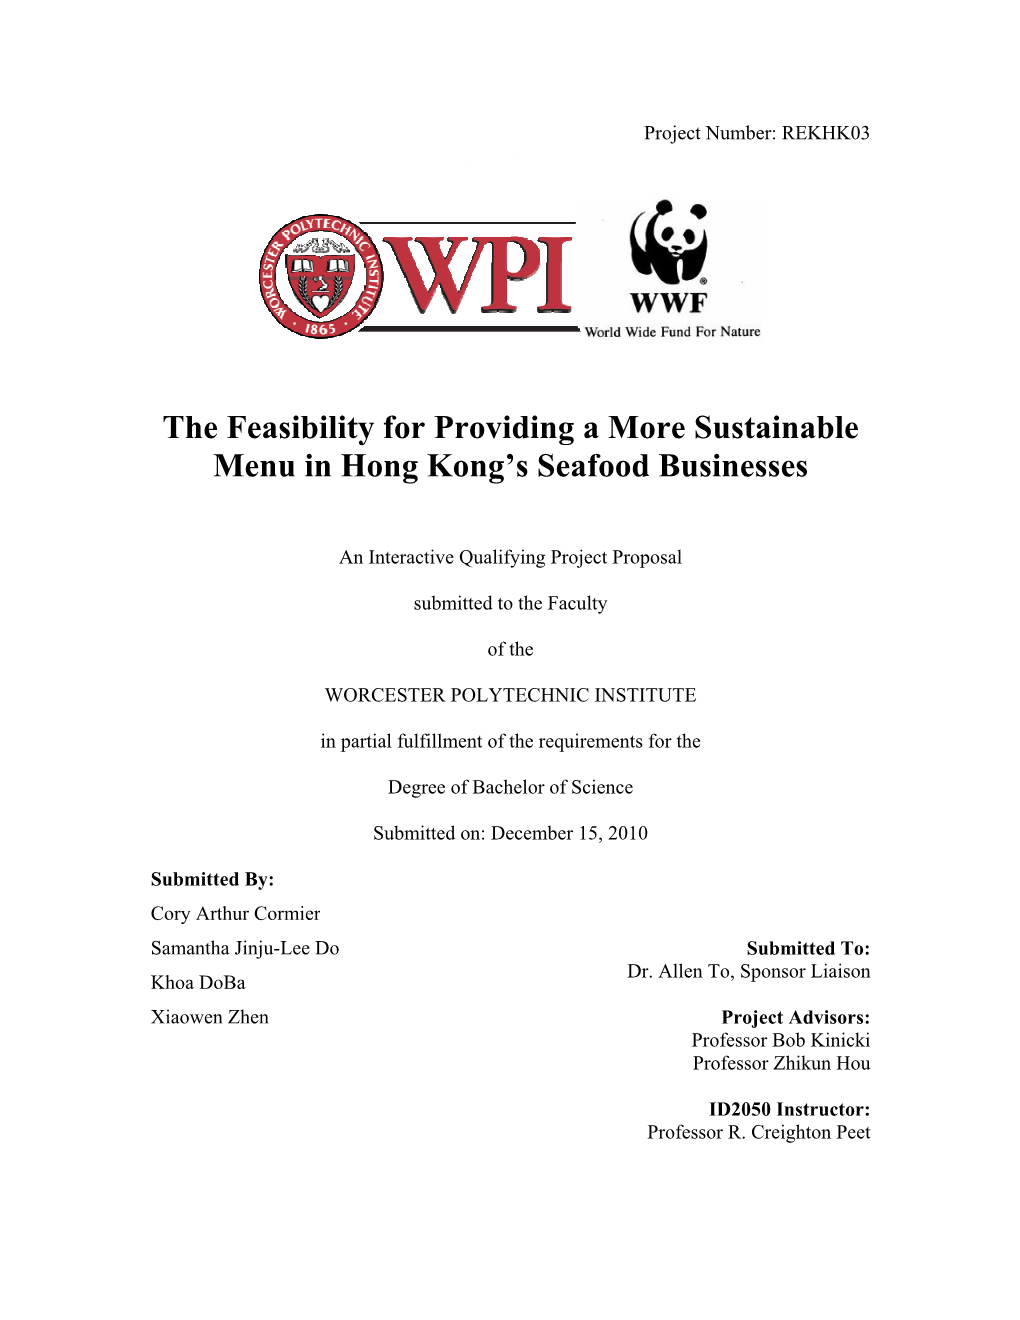 The Feasibility for Providing a More Sustainable Menu for Hong Kong's